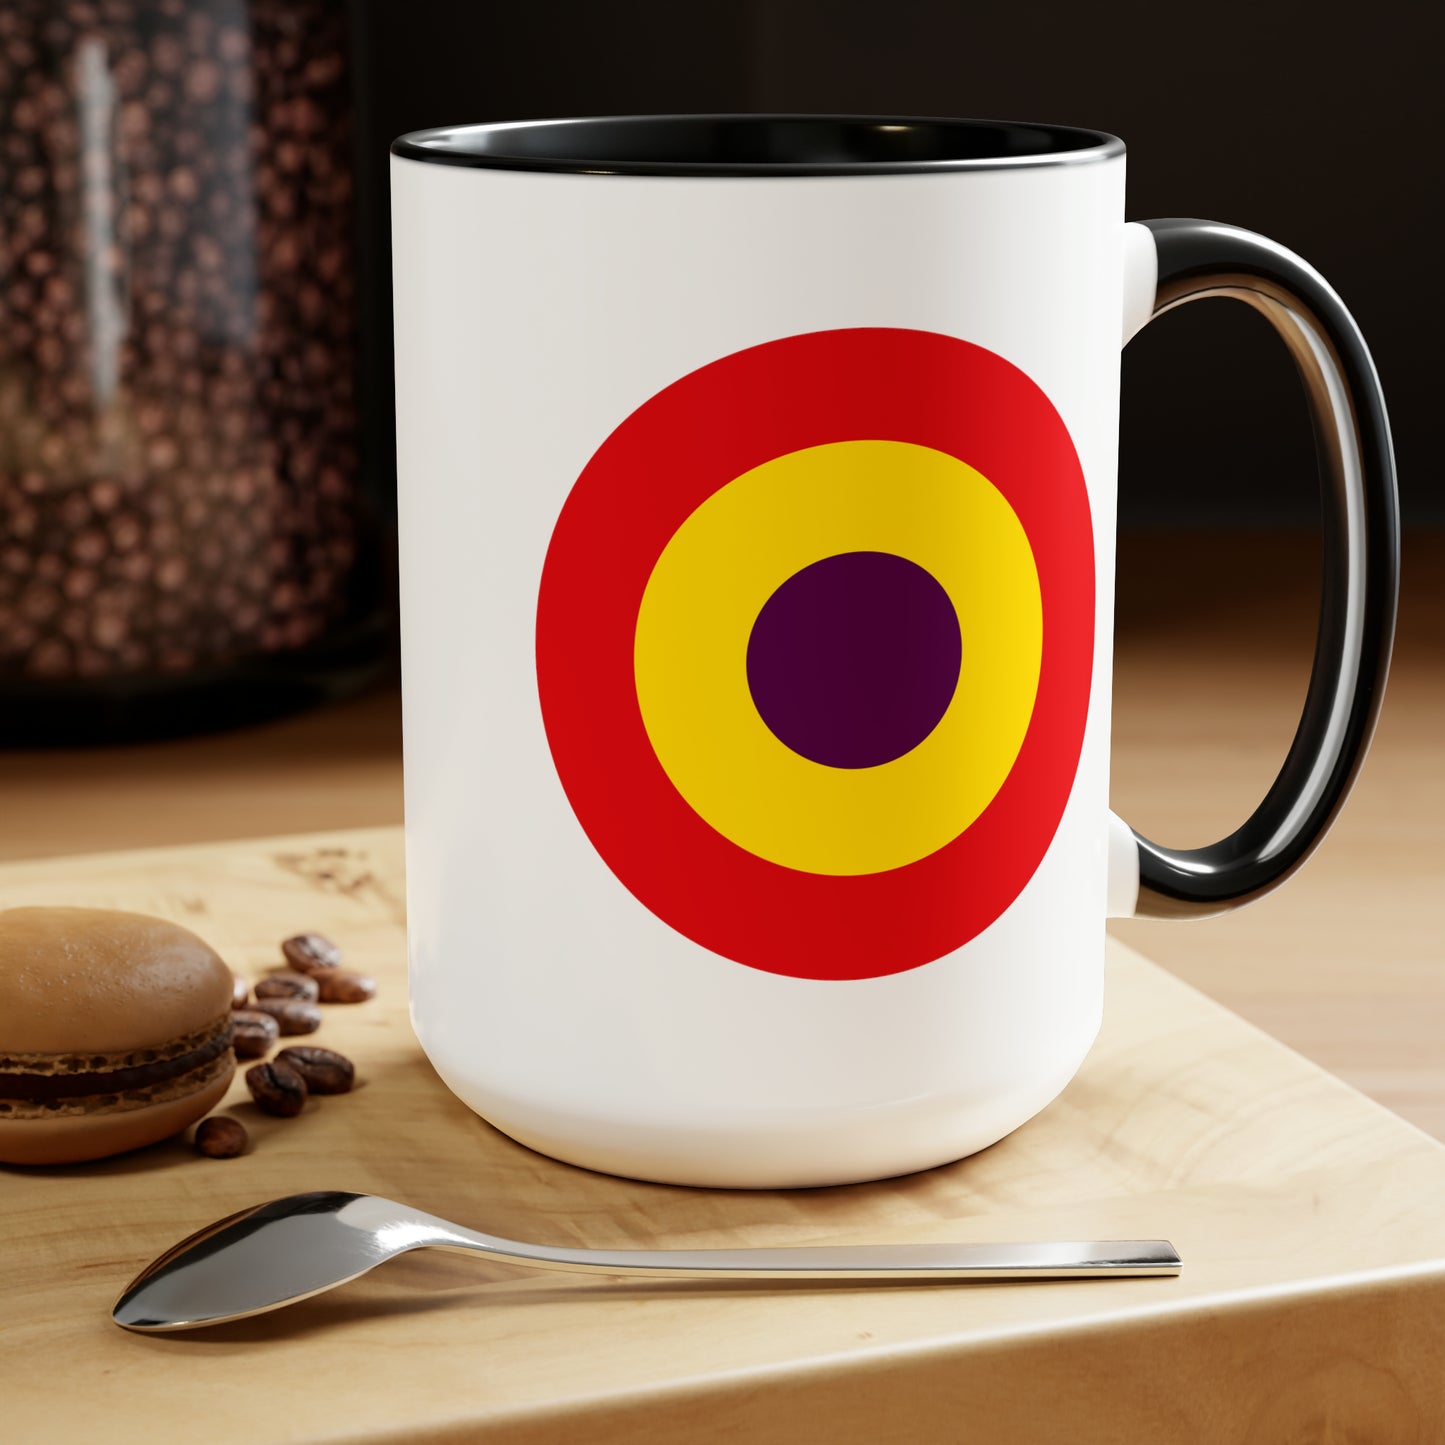 Spanish Air Force Roundel Coffee Mug - Double Sided Black Accent Ceramic 15oz - by TheGlassyLass.com